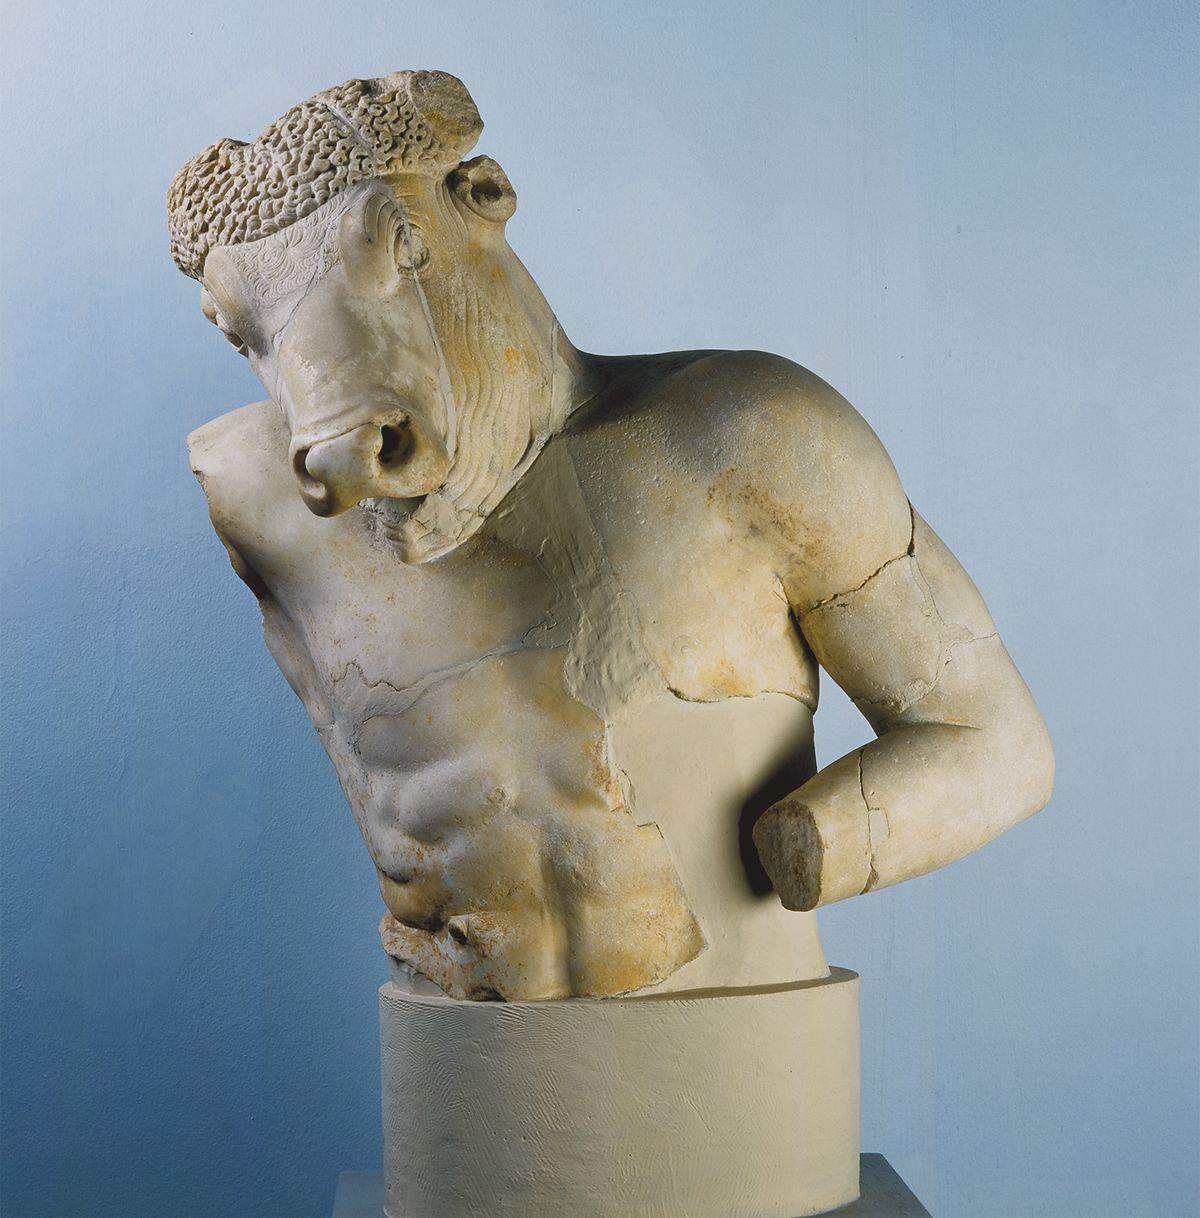 A first- to third-century marble minotaur is one of the spectacular finds in the show © Hellenic Ministry of Culture and Sports/Hellenic Organization of Cultural Resources Development